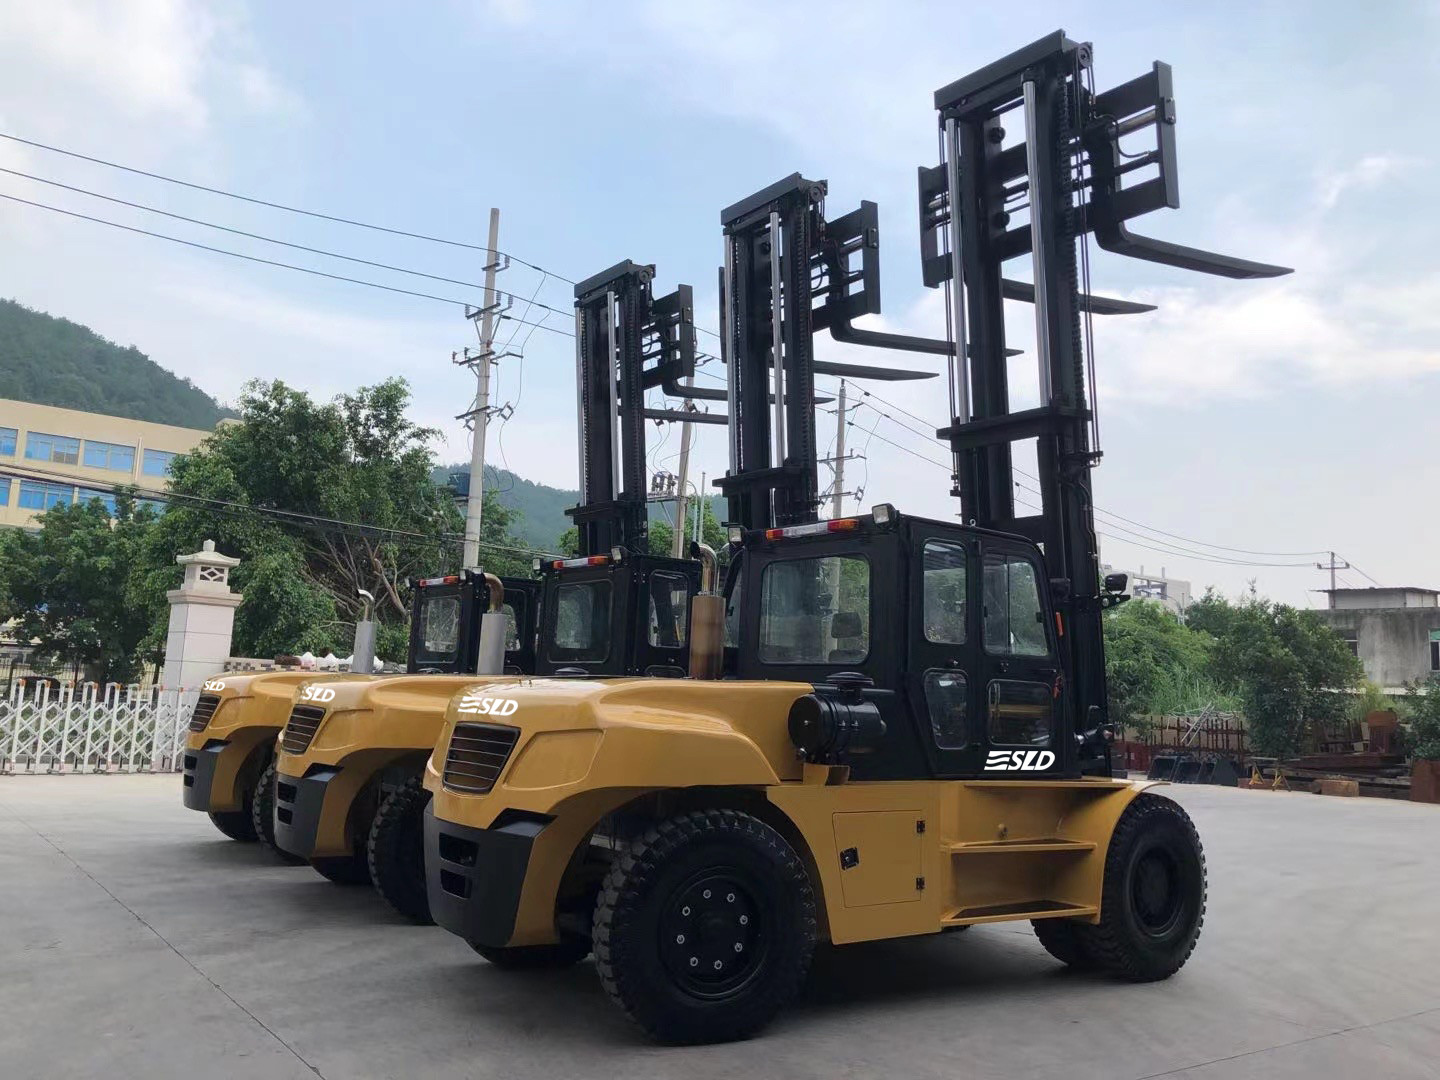 Quality 3m Heavy Lift Forklift Tr for sale